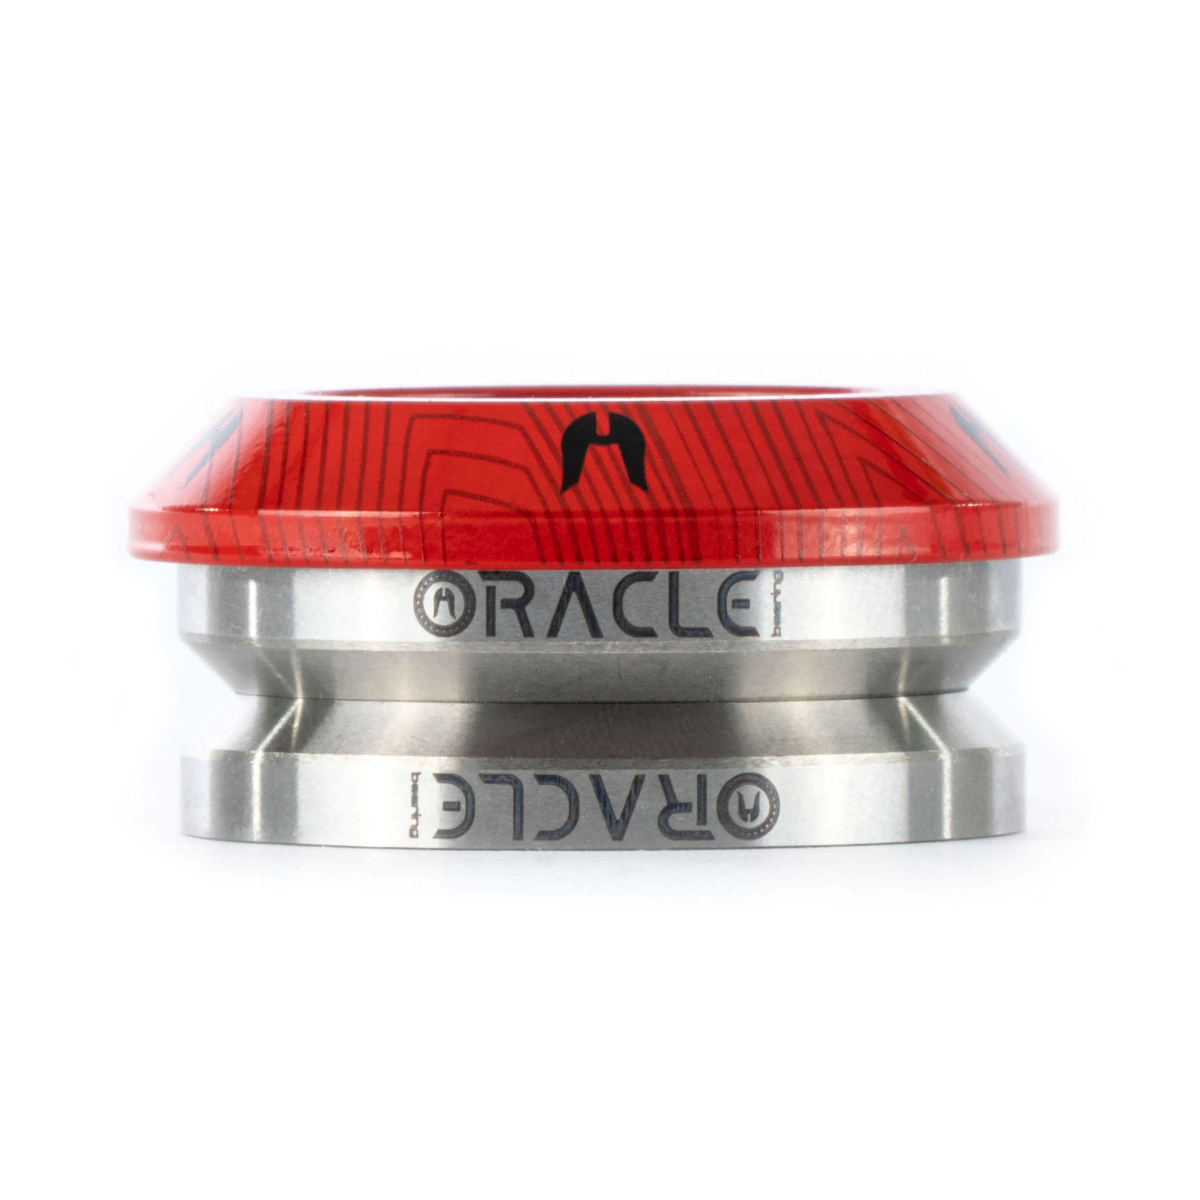 Ethic DTC Headset Oracle Rouge